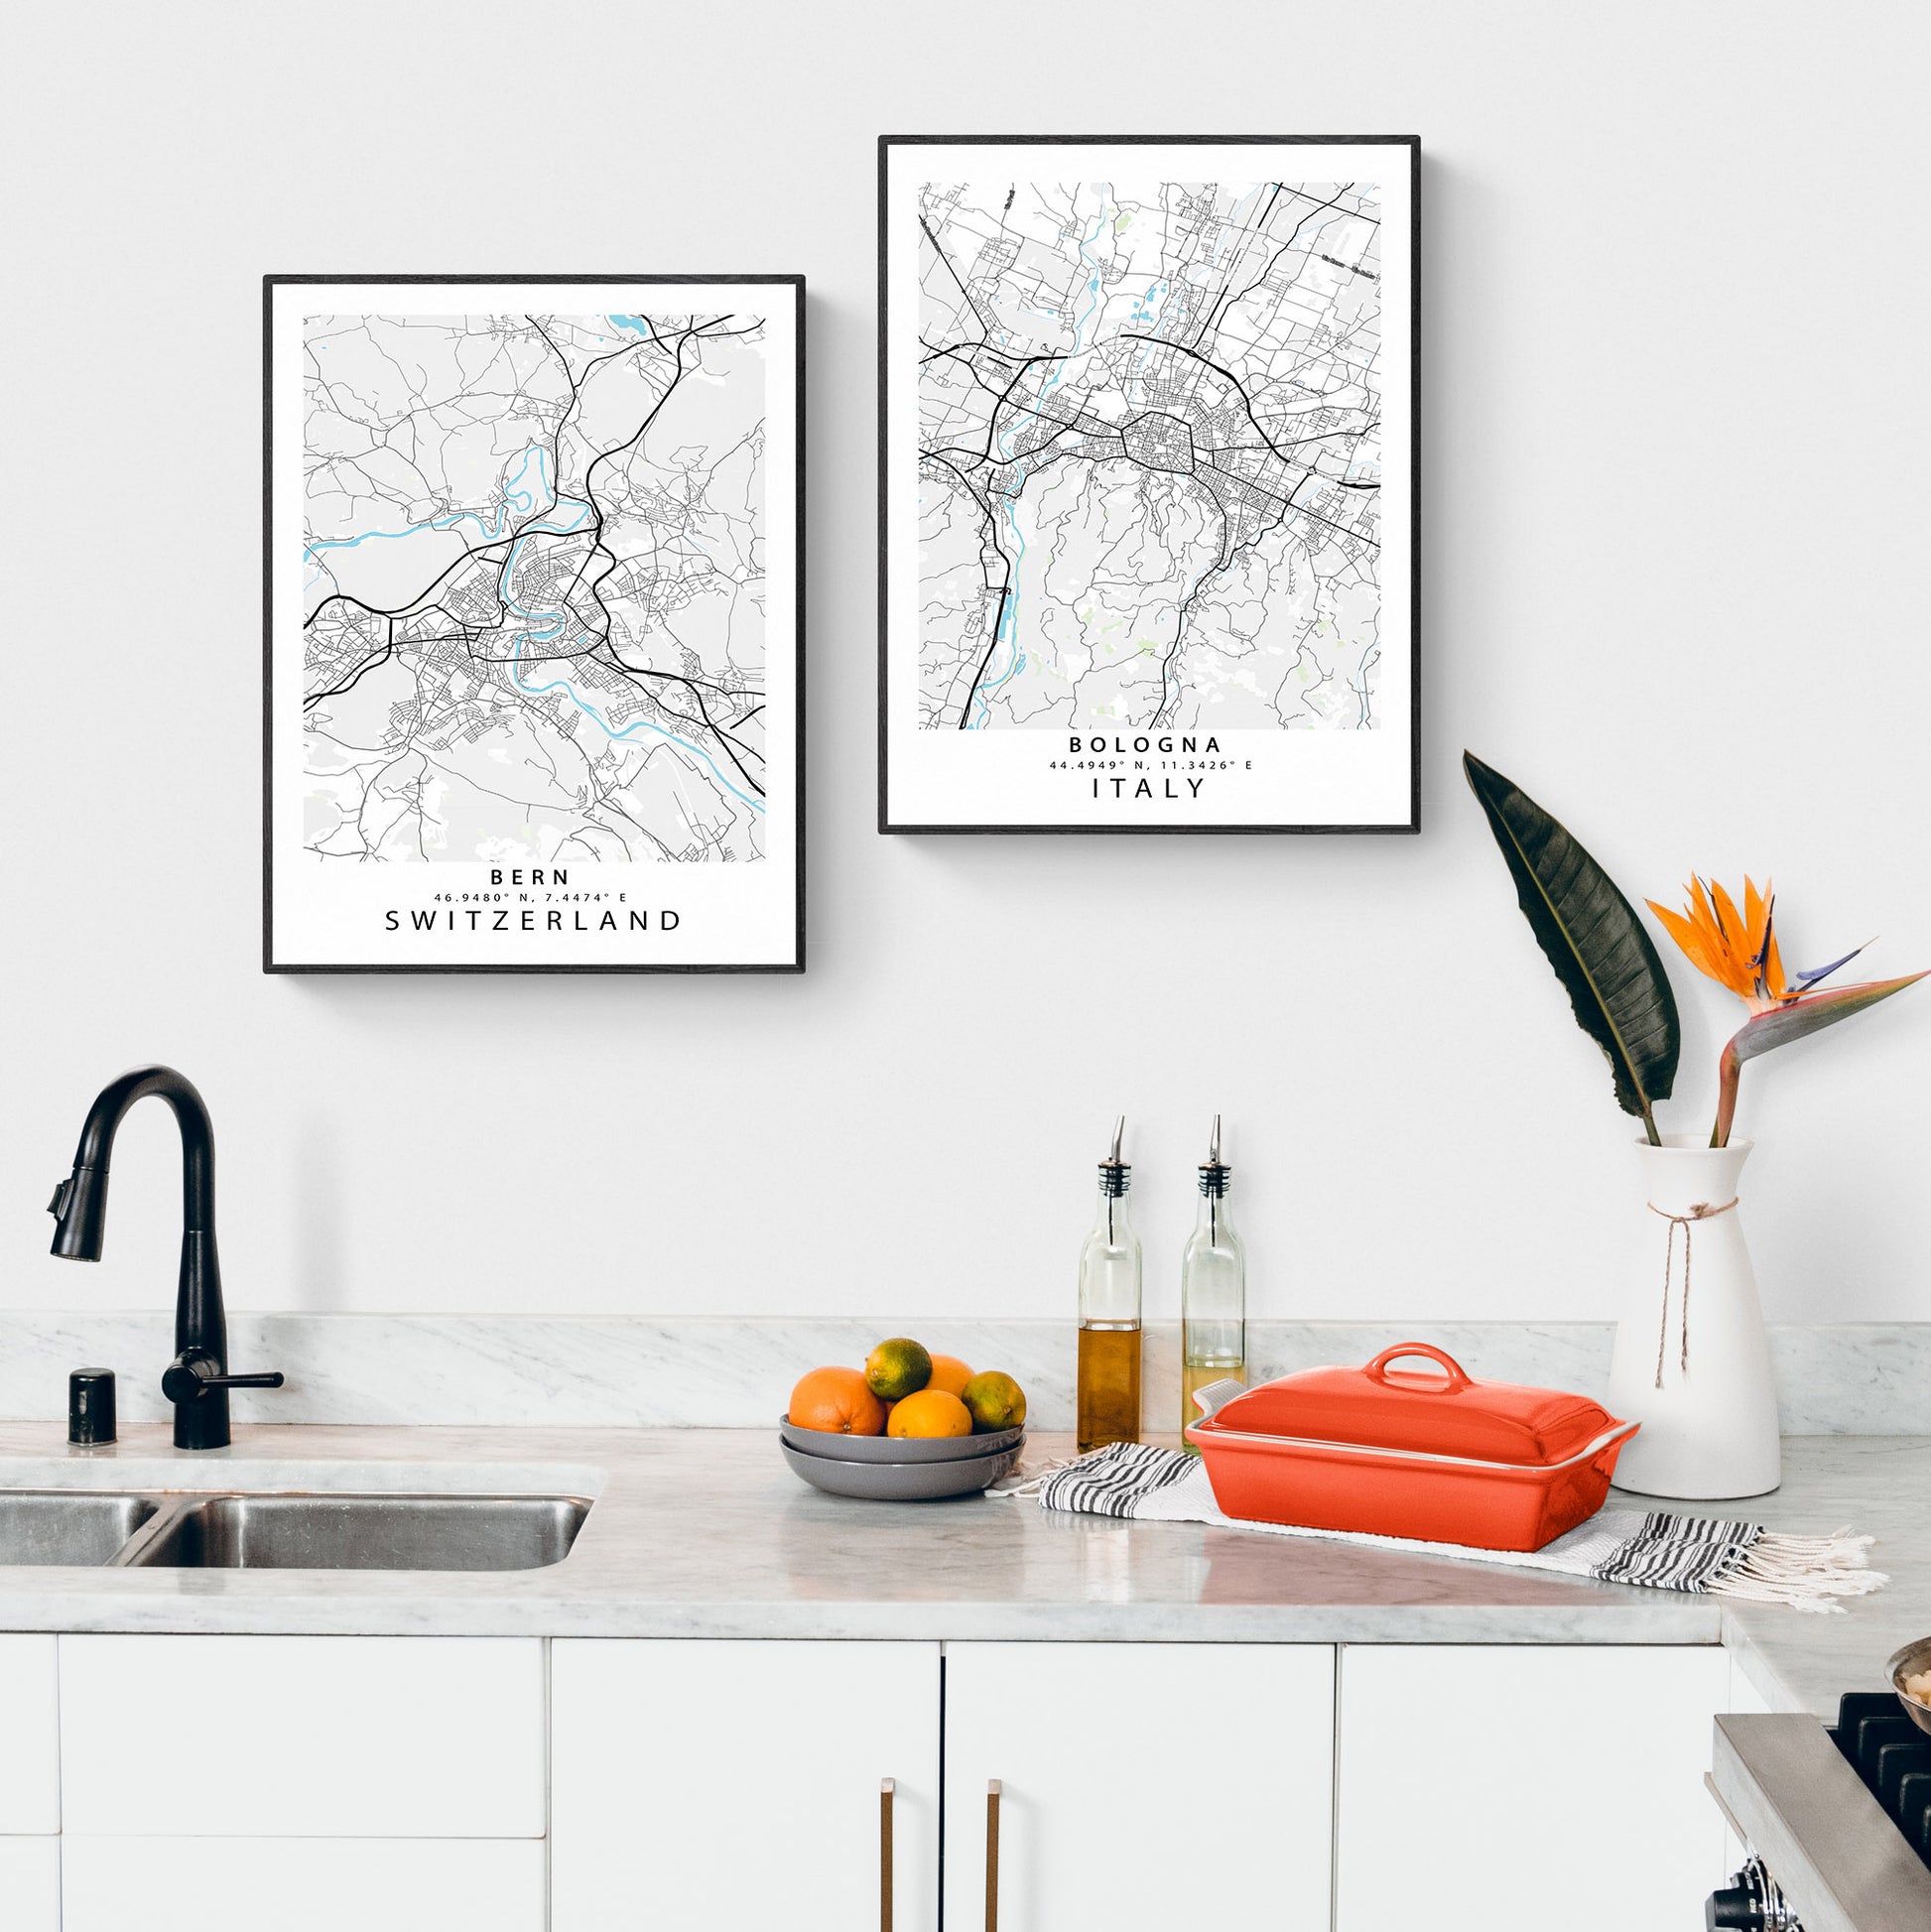 Check out this stylish and modern Bologna Street Map Poster! It's the perfect way to show off your love of all things maps, cities, and Scandi-style decor. Featuring custom map art prints, it's the ideal addition to any home. So grab yours today and map a little extra joy into your life!